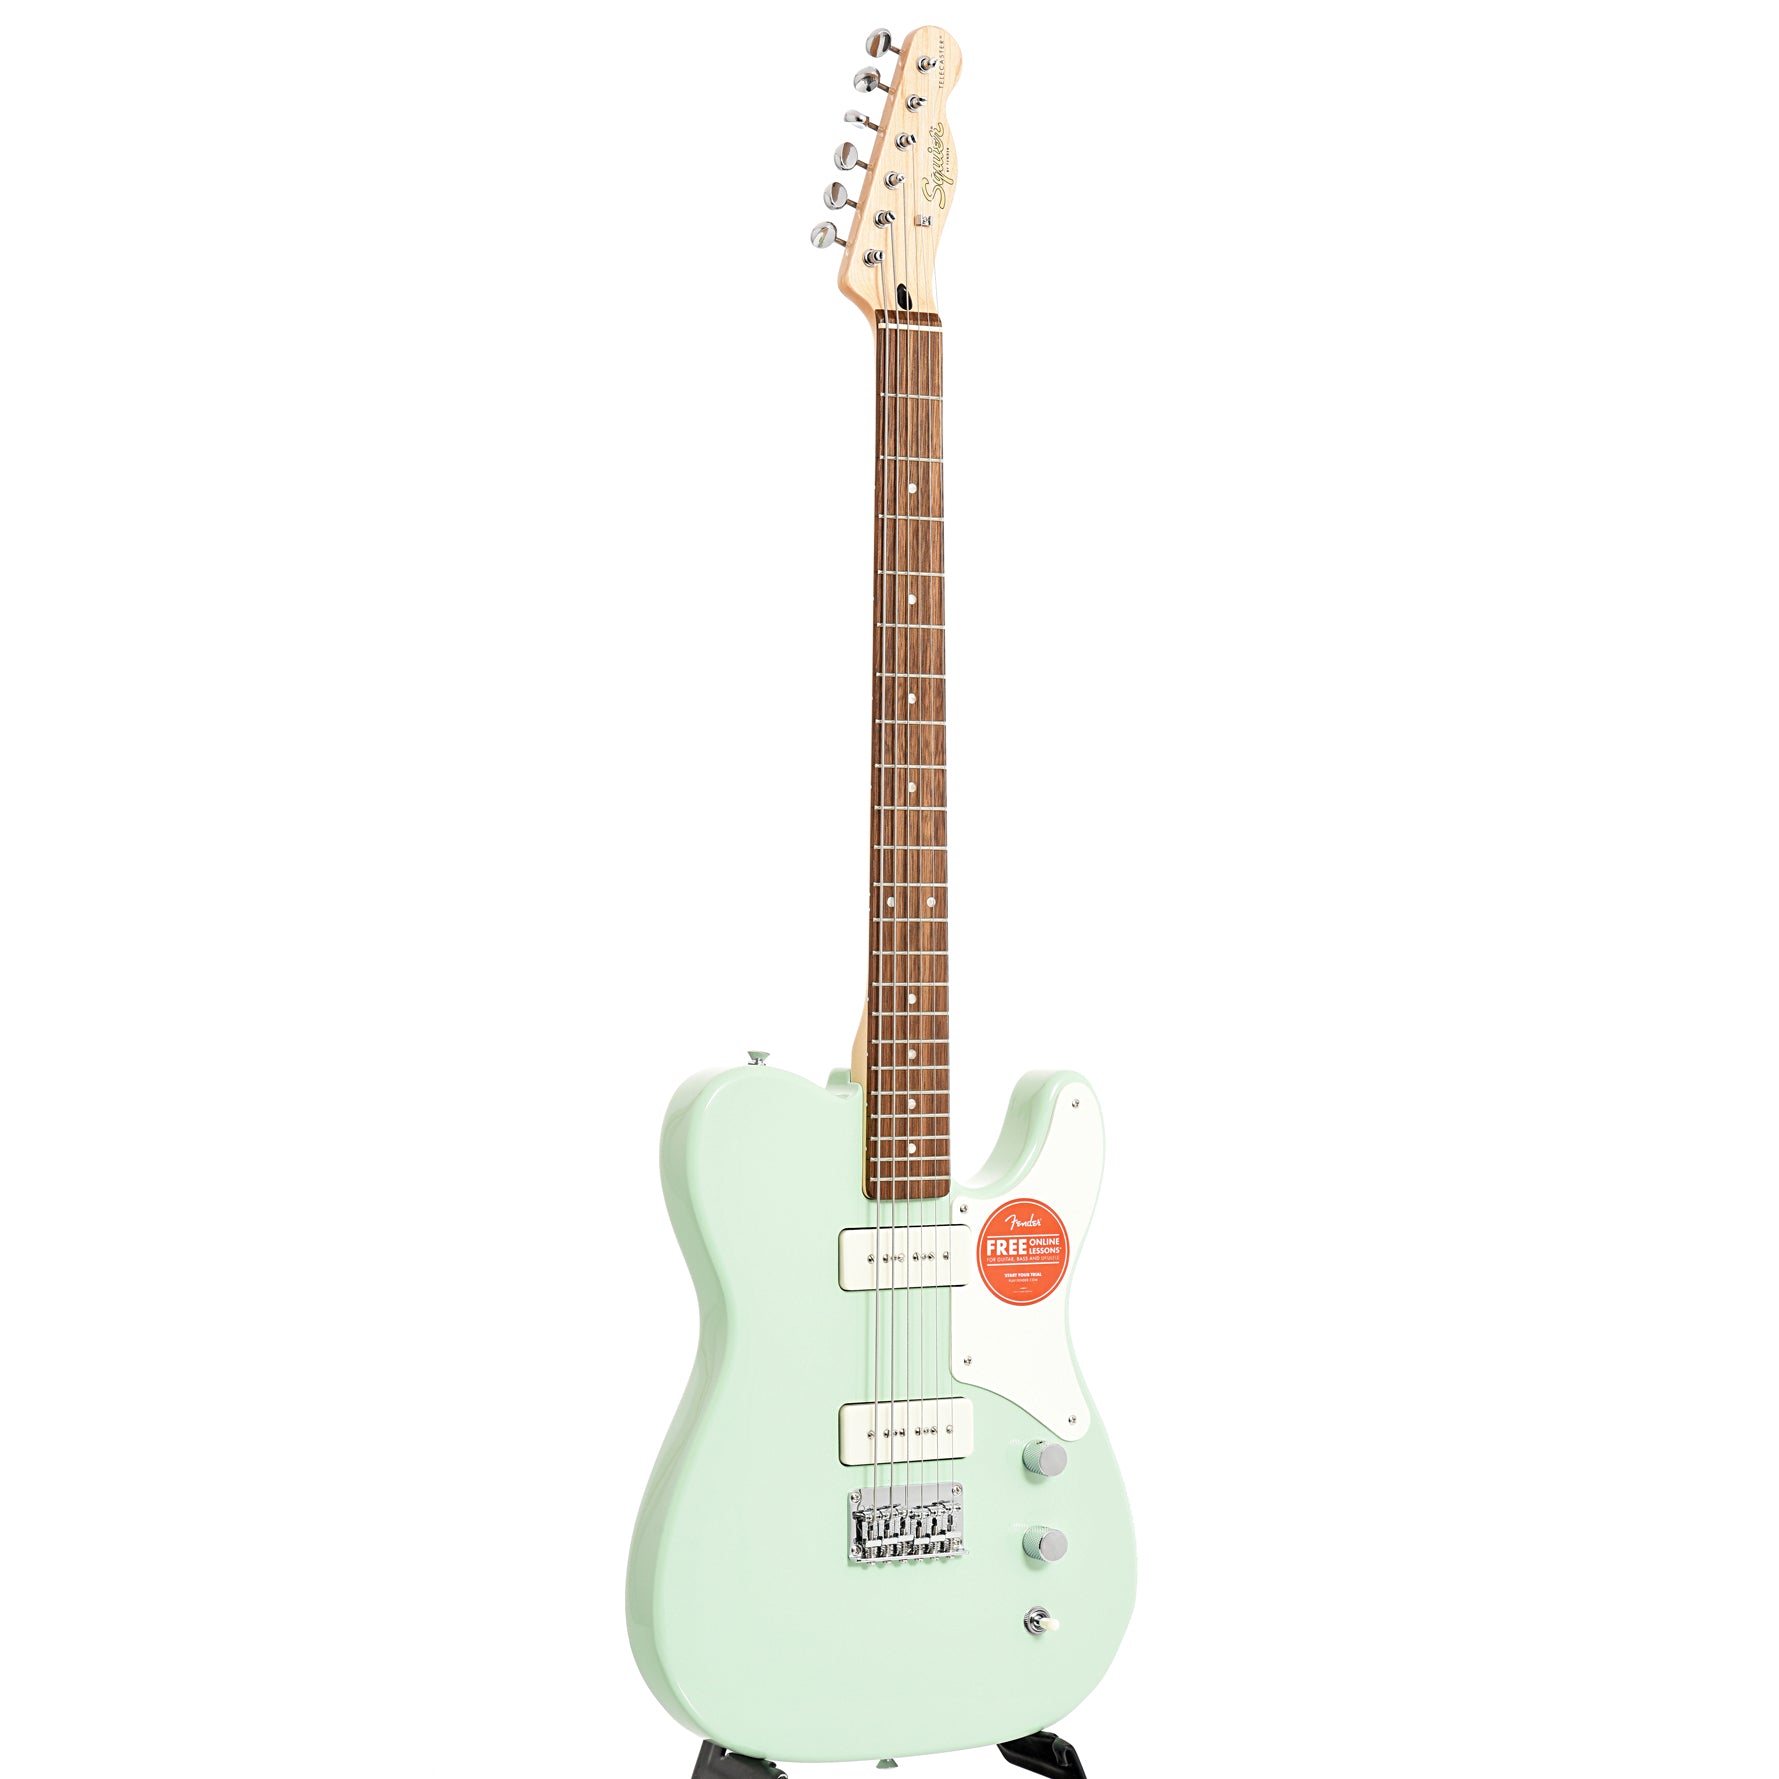 Image 11 of Squier Paranormal Baritone Cabronita Telecaster, Surf Green- SKU# SPBARICT-SFG : Product Type Other : Elderly Instruments